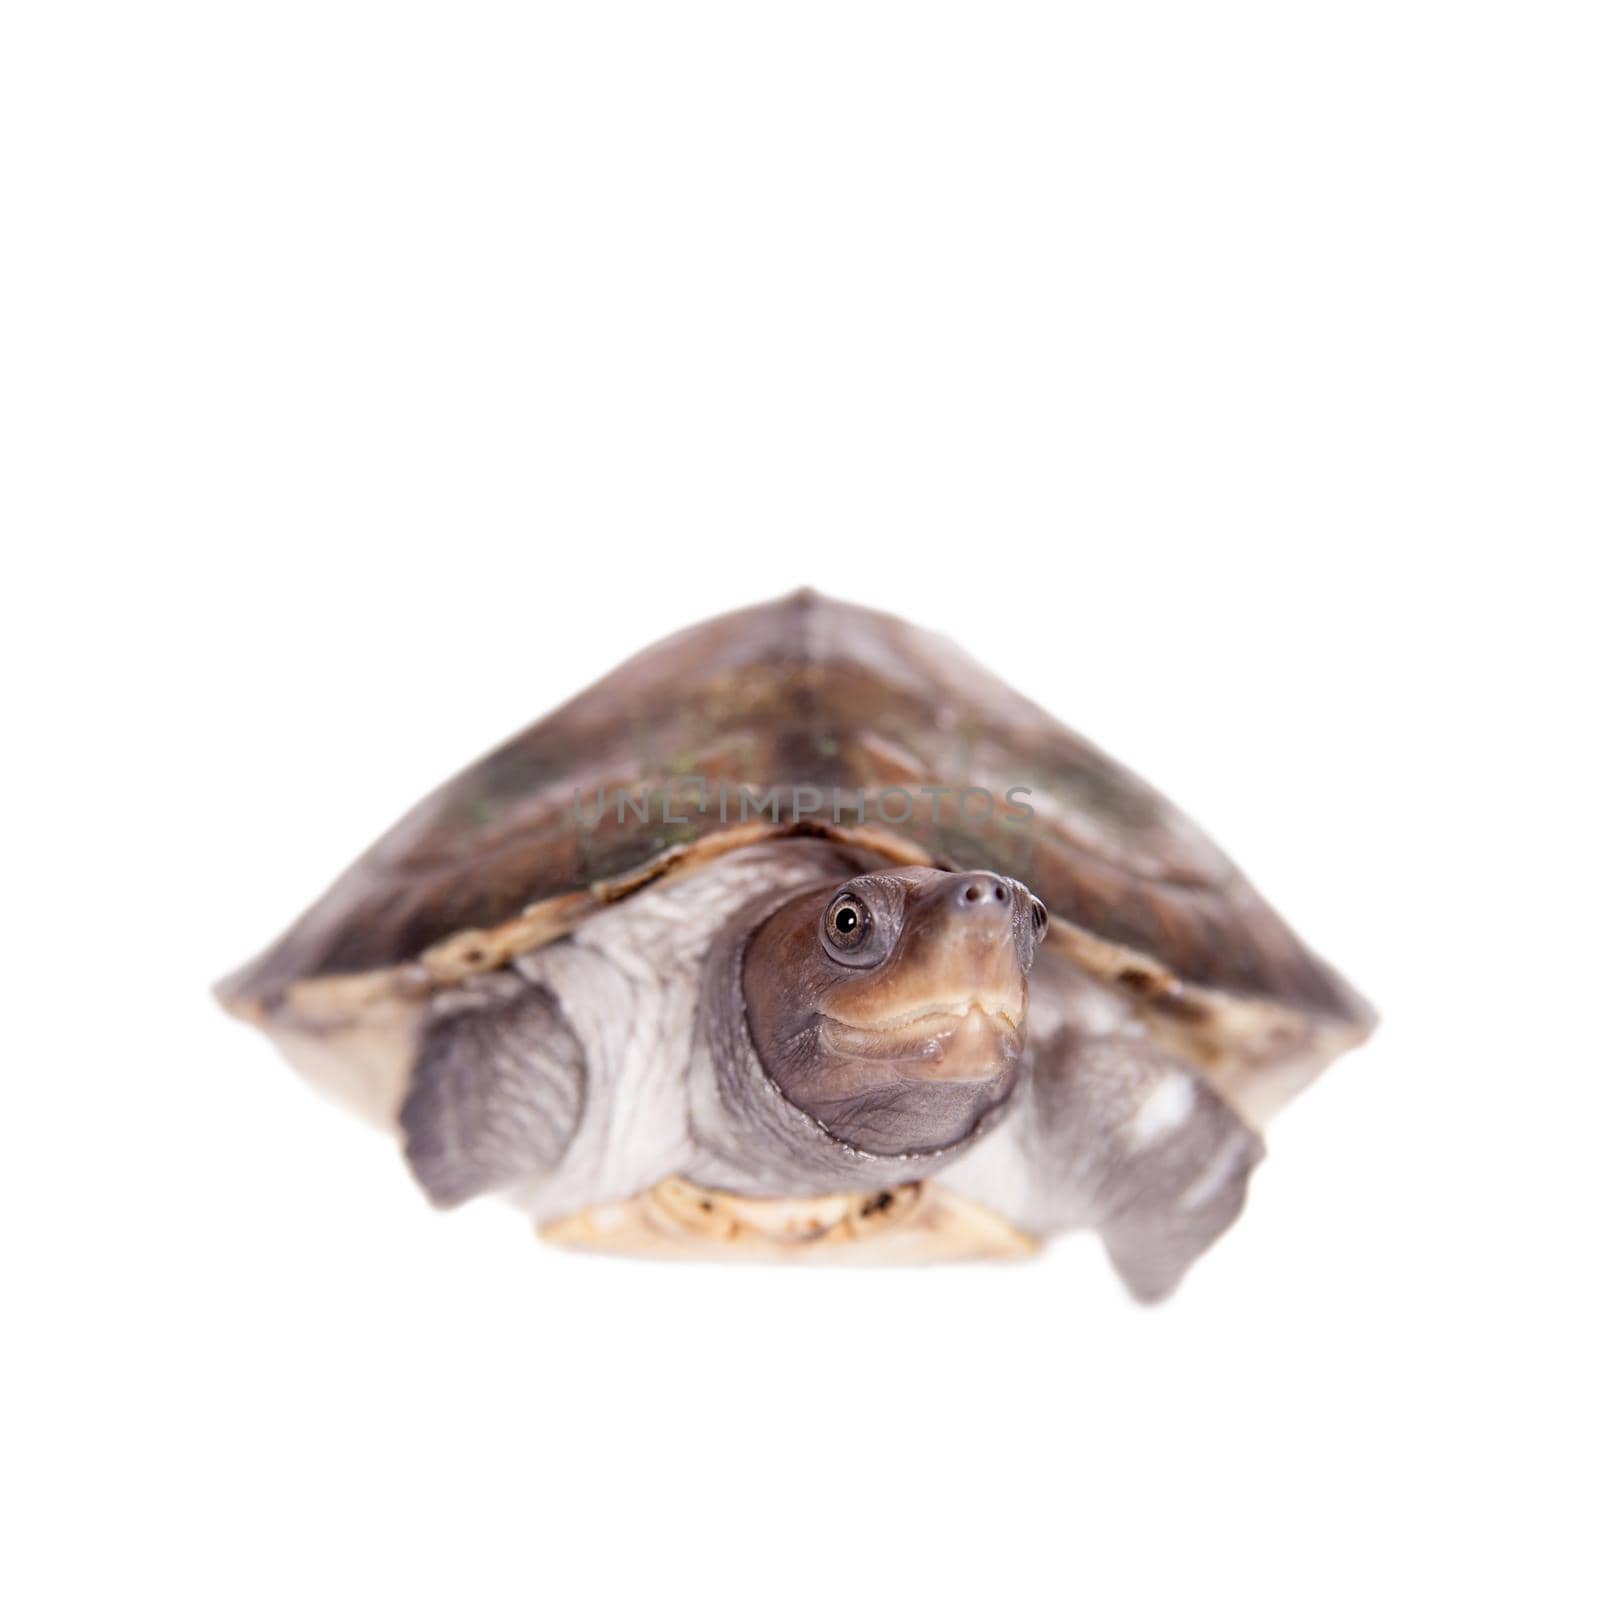 Painted river terrapin on white background. by RosaJay